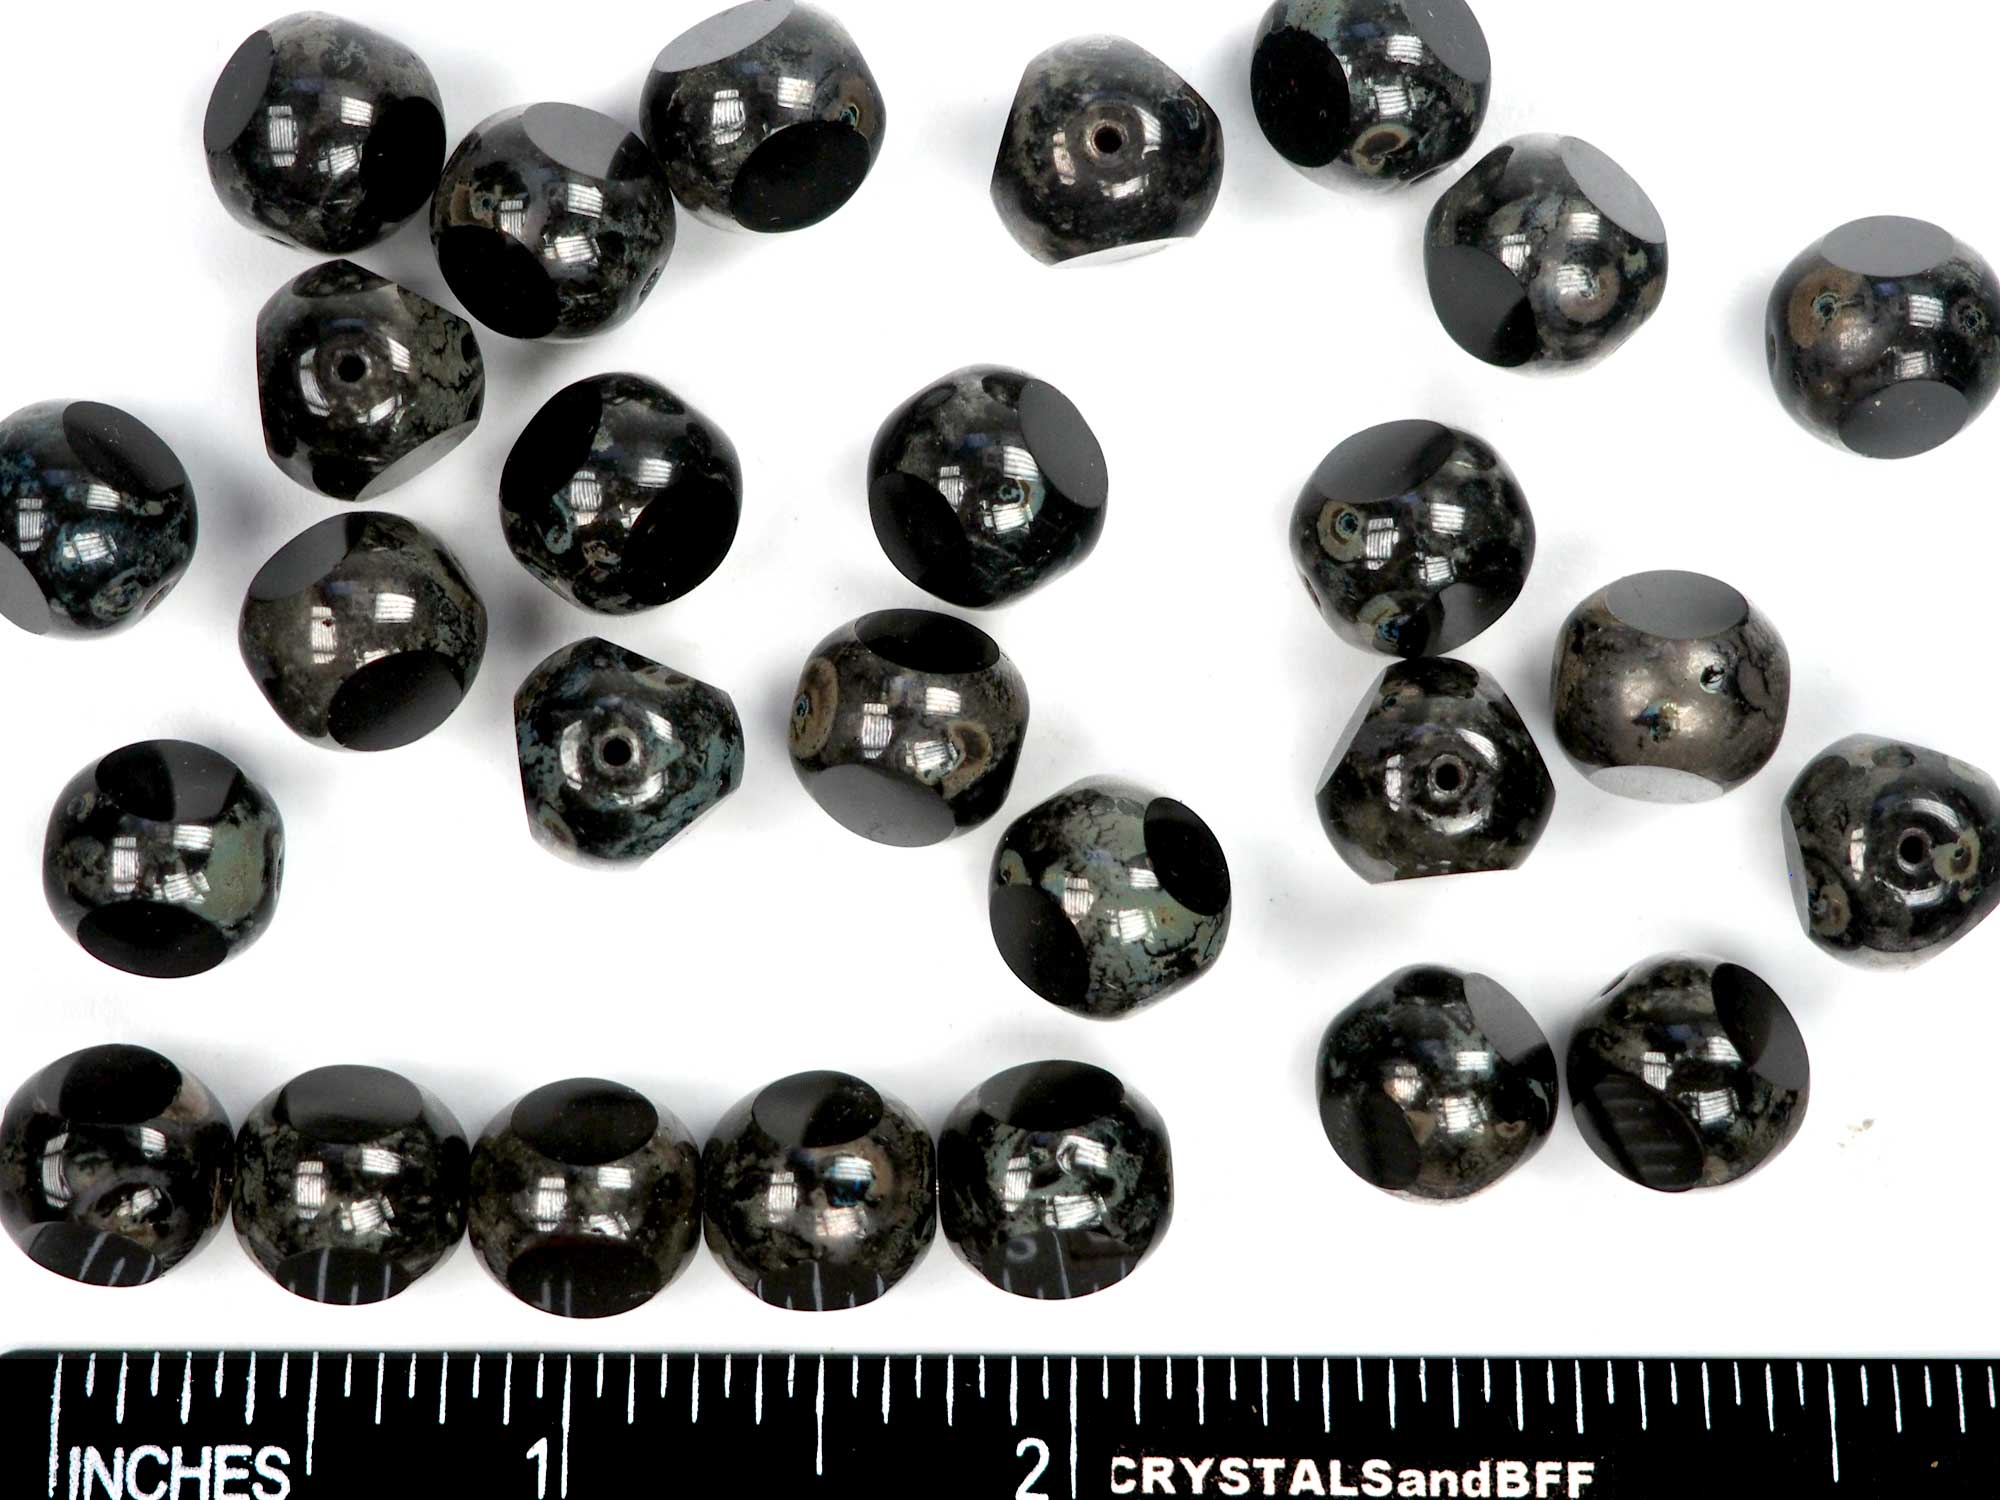 Czech Glass 3-Cut Round Window Beads (Soccer Ball Bead) Art. 151-19501 in size 12mm, Jet black with Picasso coating, 12pcs, P884